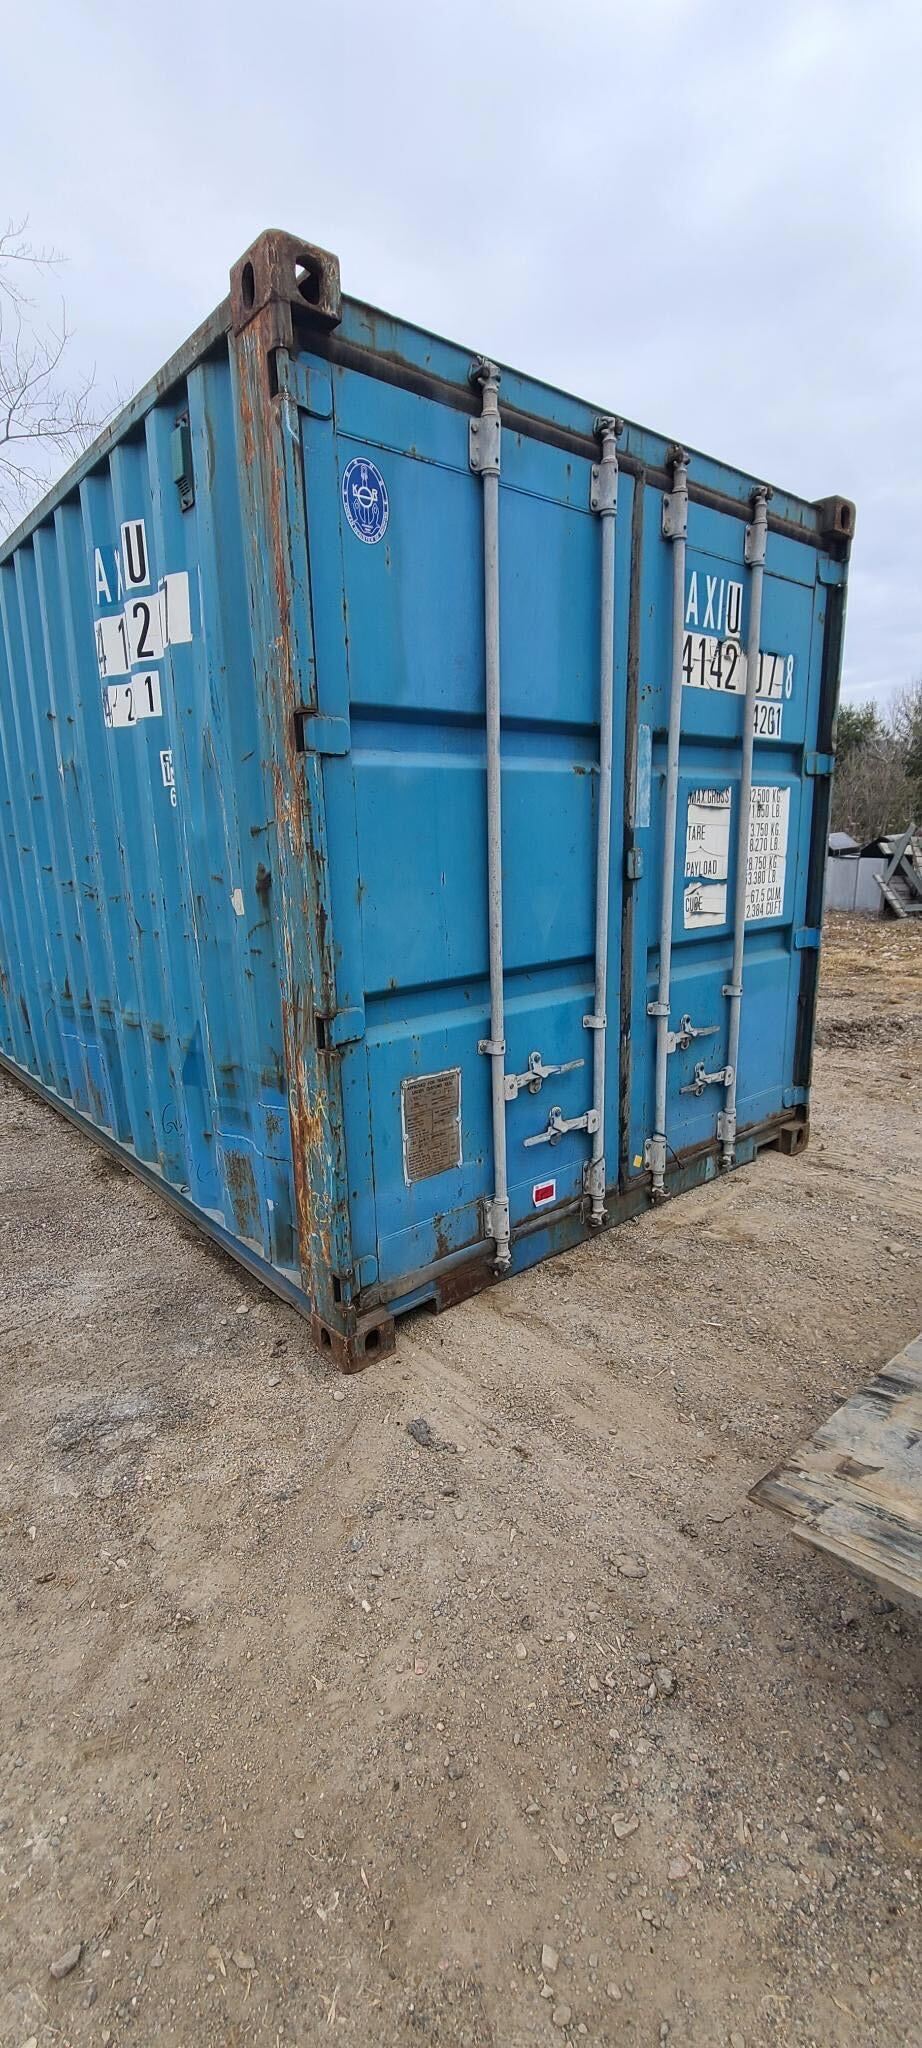 Used 40-Ft High Cube Shipping Container (CW) - Stlbx Gatineau